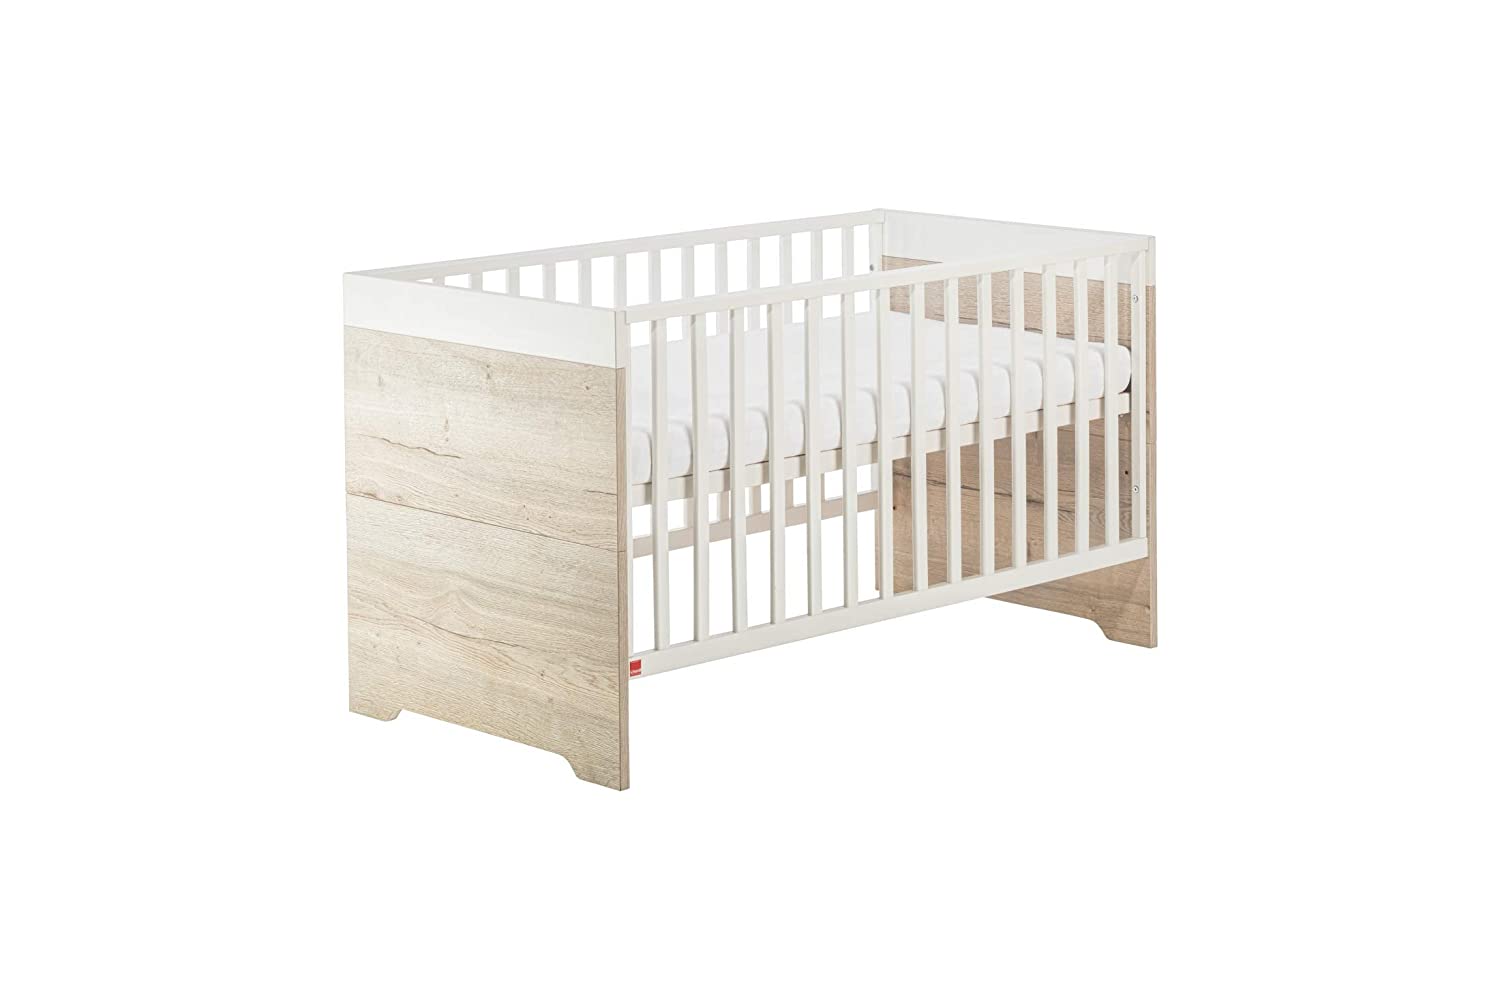 Schardt Highlight Oak, 10 952 28 00 Nursery Furniture with Convertible Cot and Changing Table with Nappy Changing Table 70 x 140 cm beige